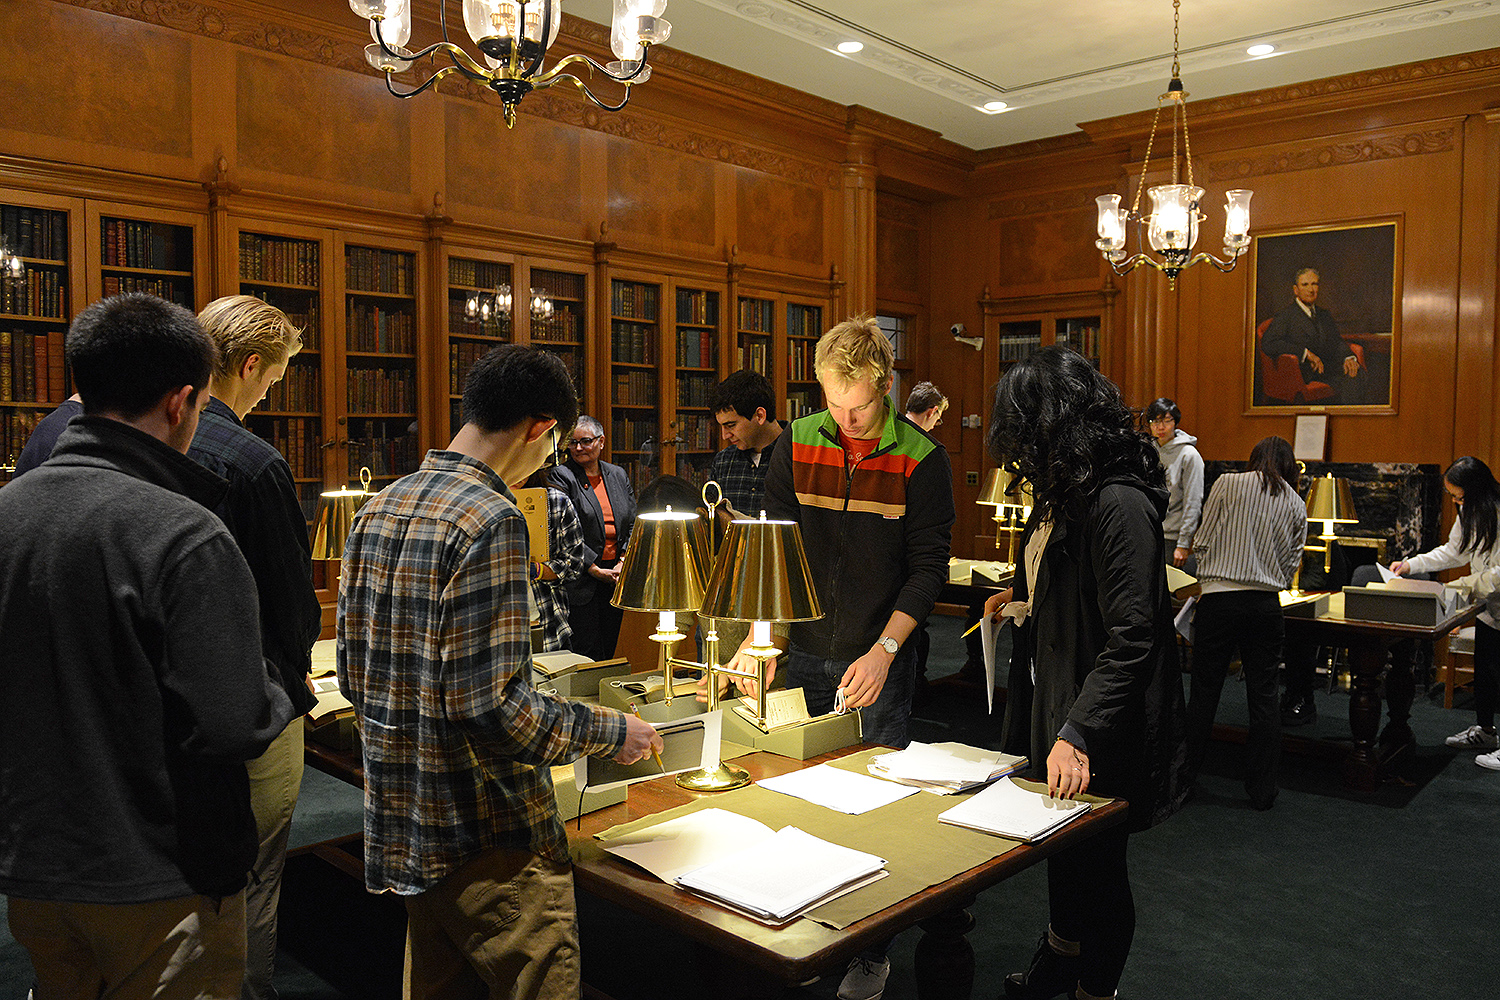 The visit to Special Collections and Archives provided students with a multifaceted view on missionary activities, connected to Wesleyan’s history and the content of the course. "Students found value in utilizing and learning from these primary sources," Cho said. (Photos by Olivia Drake) 